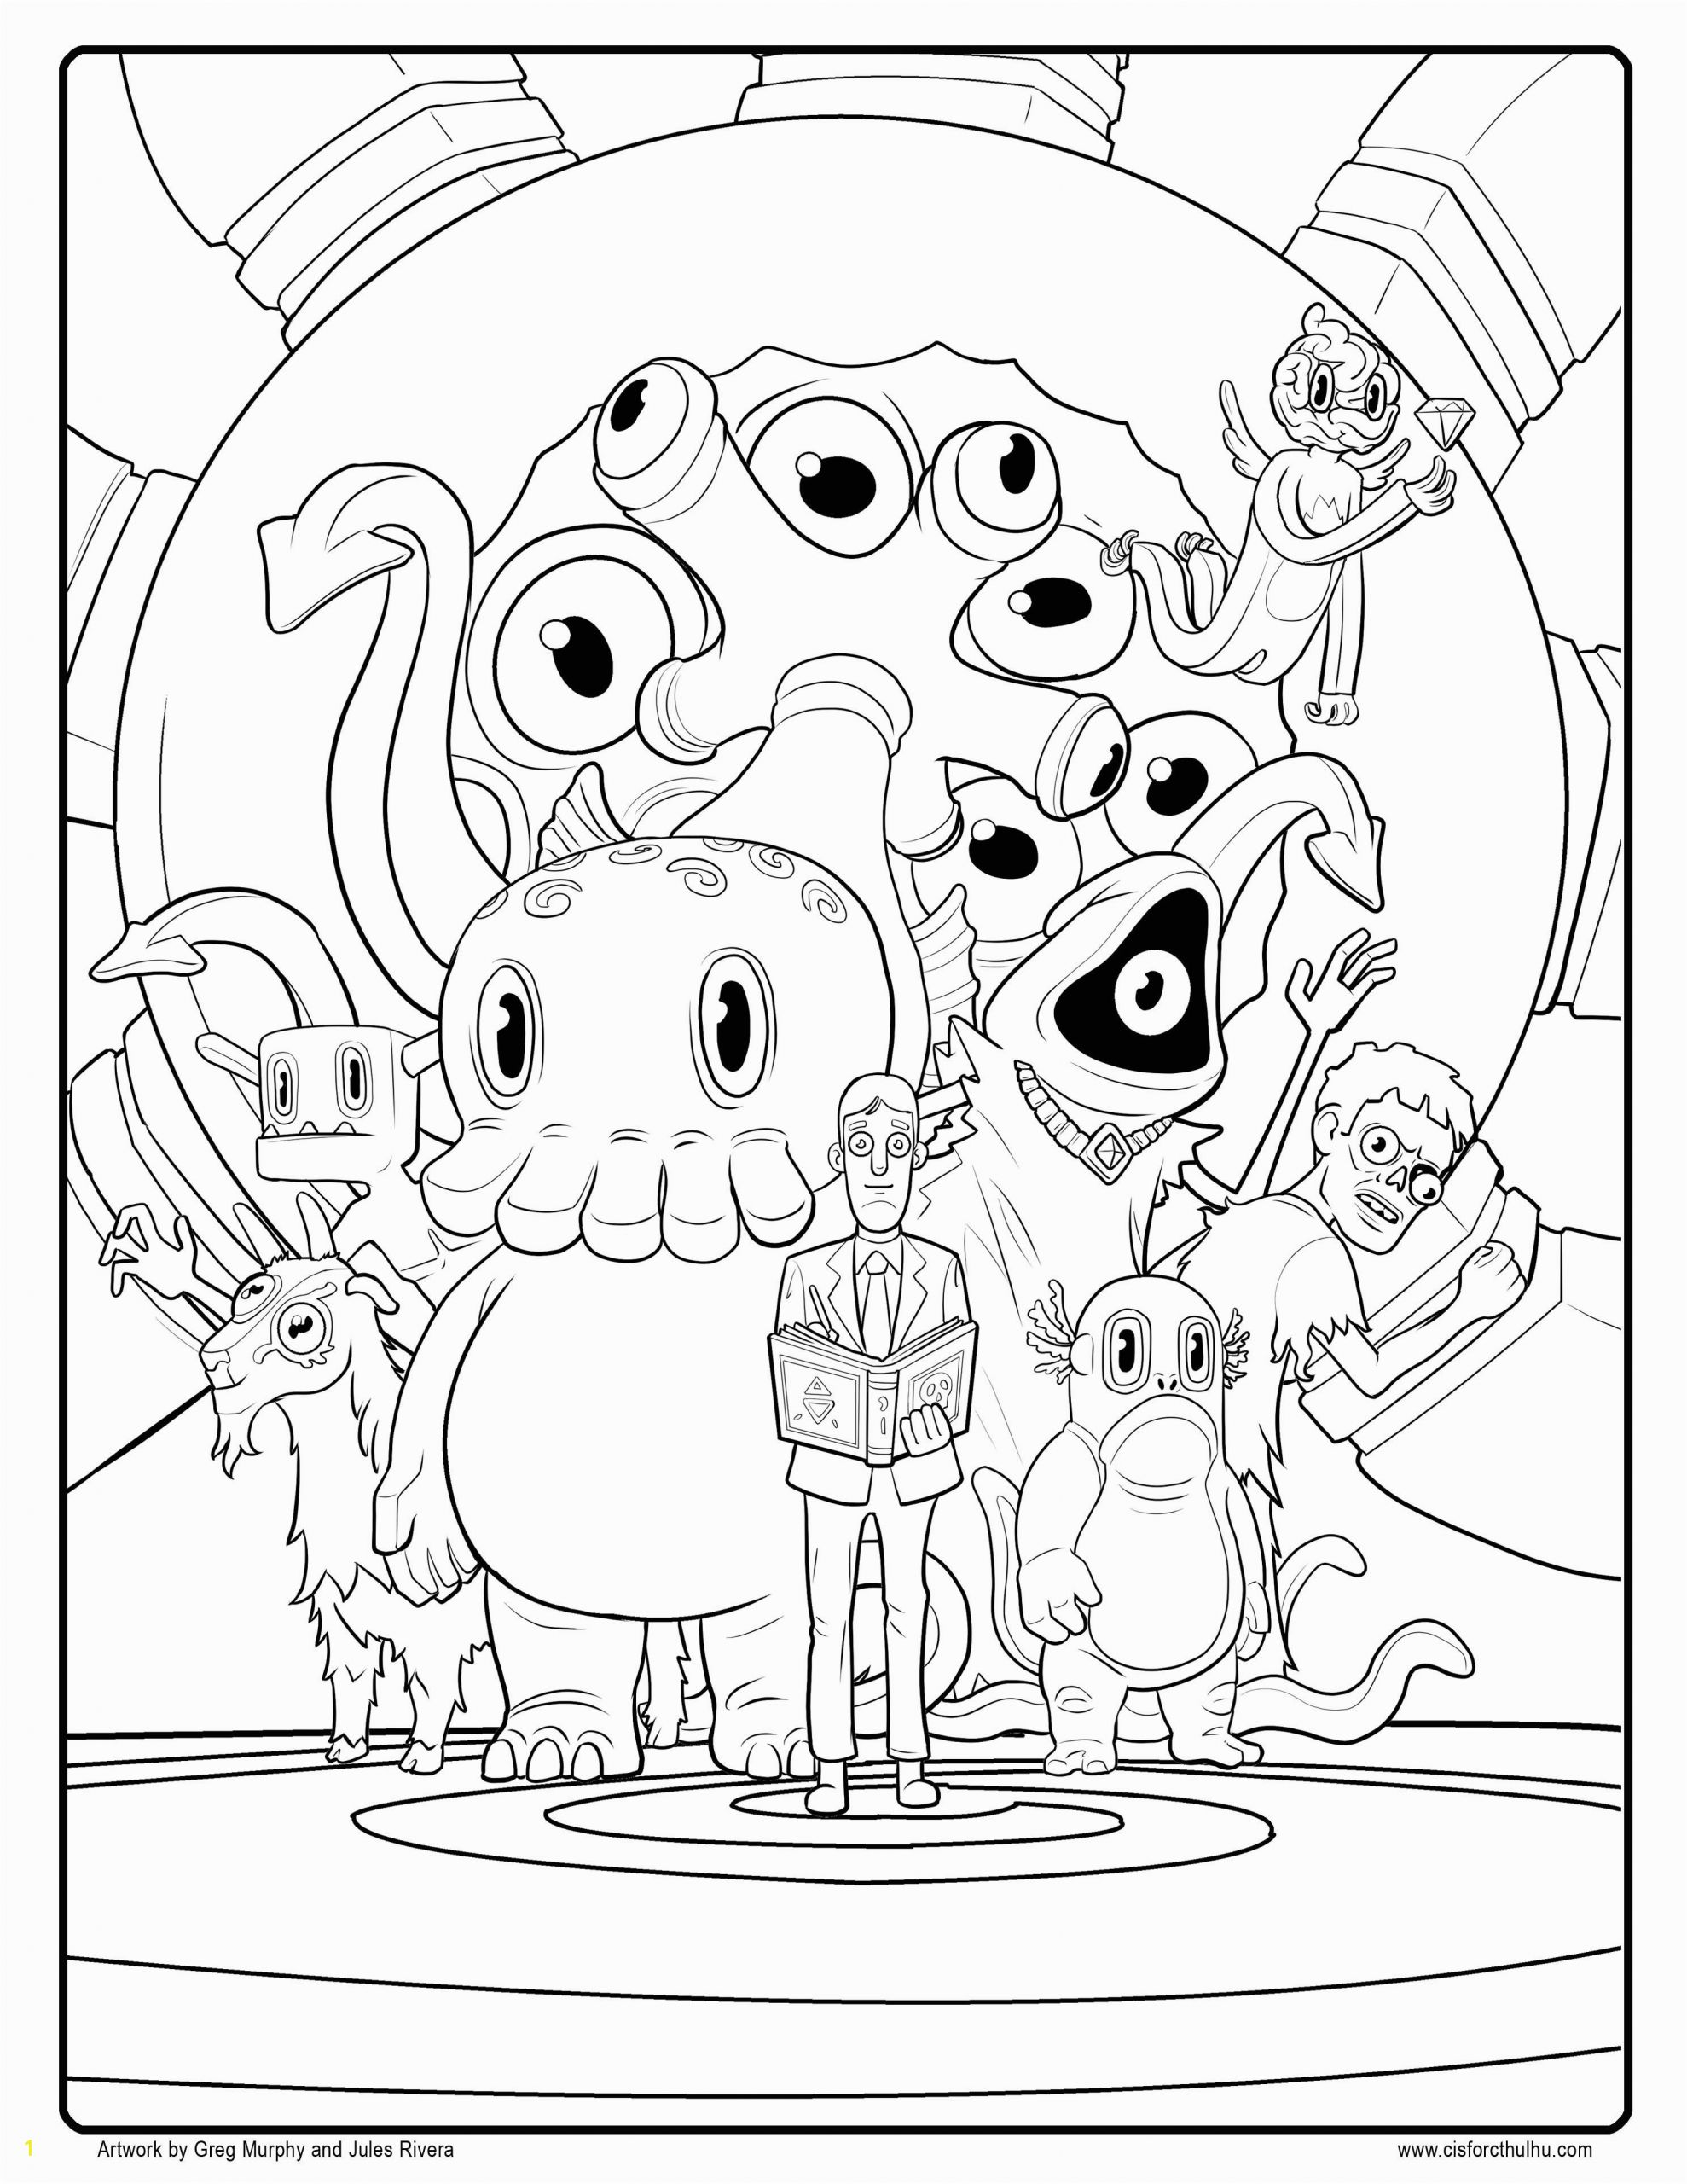 Hello Kitty Summer Coloring Pages Free C is for Cthulhu Coloring Sheet